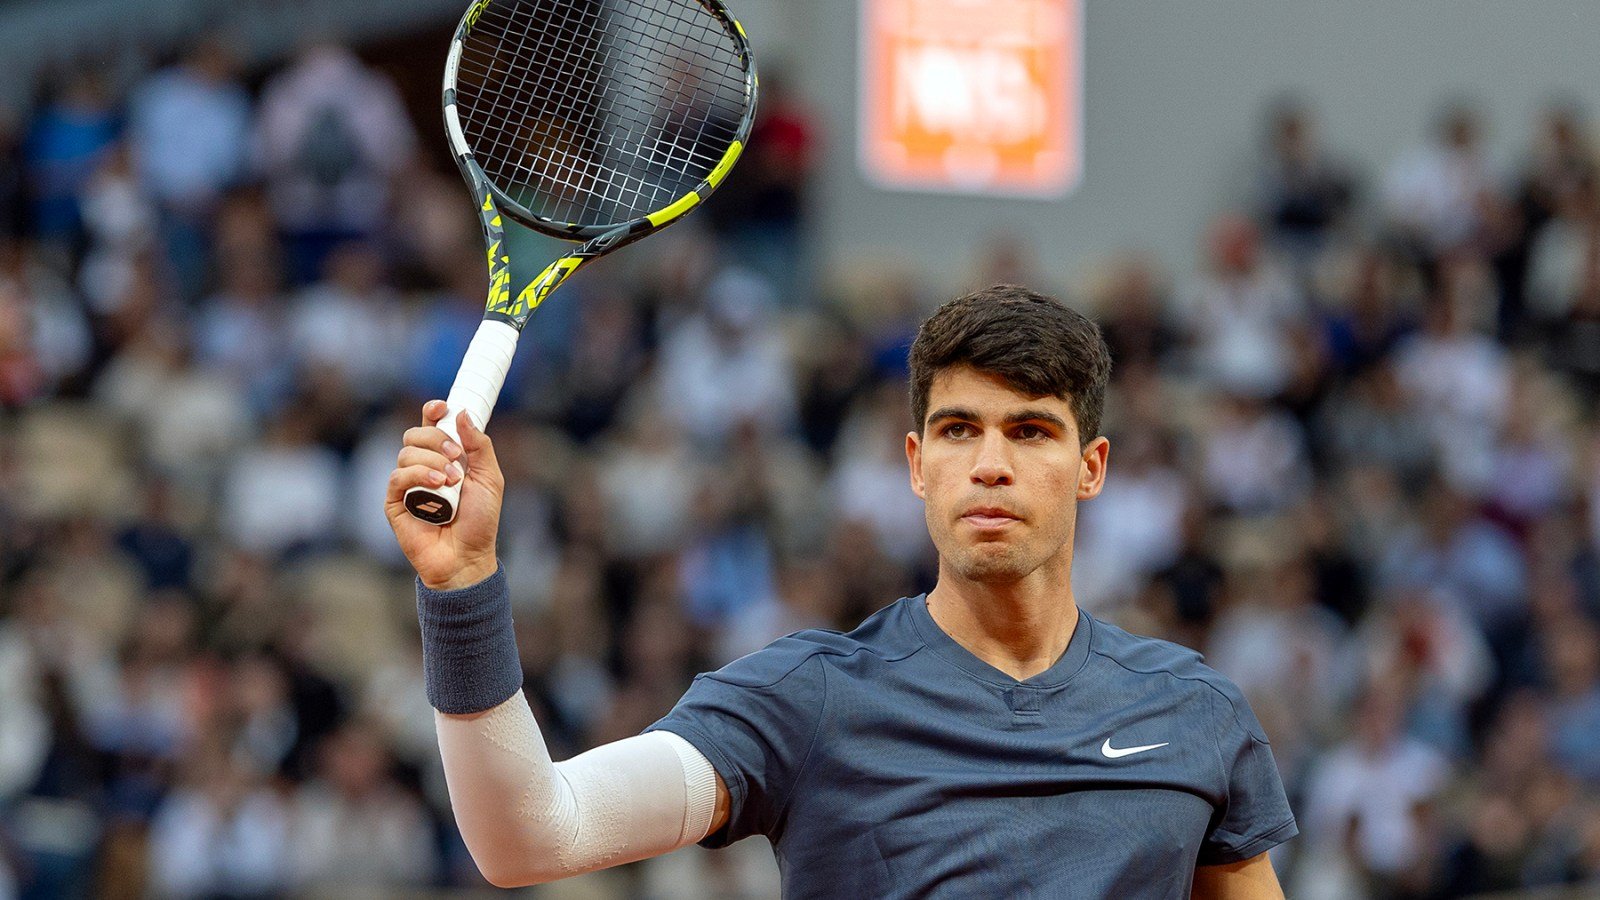 Alcaraz vs. Sinner Livestream: How to Watch the French Open Semifinal Tennis Match Online Free